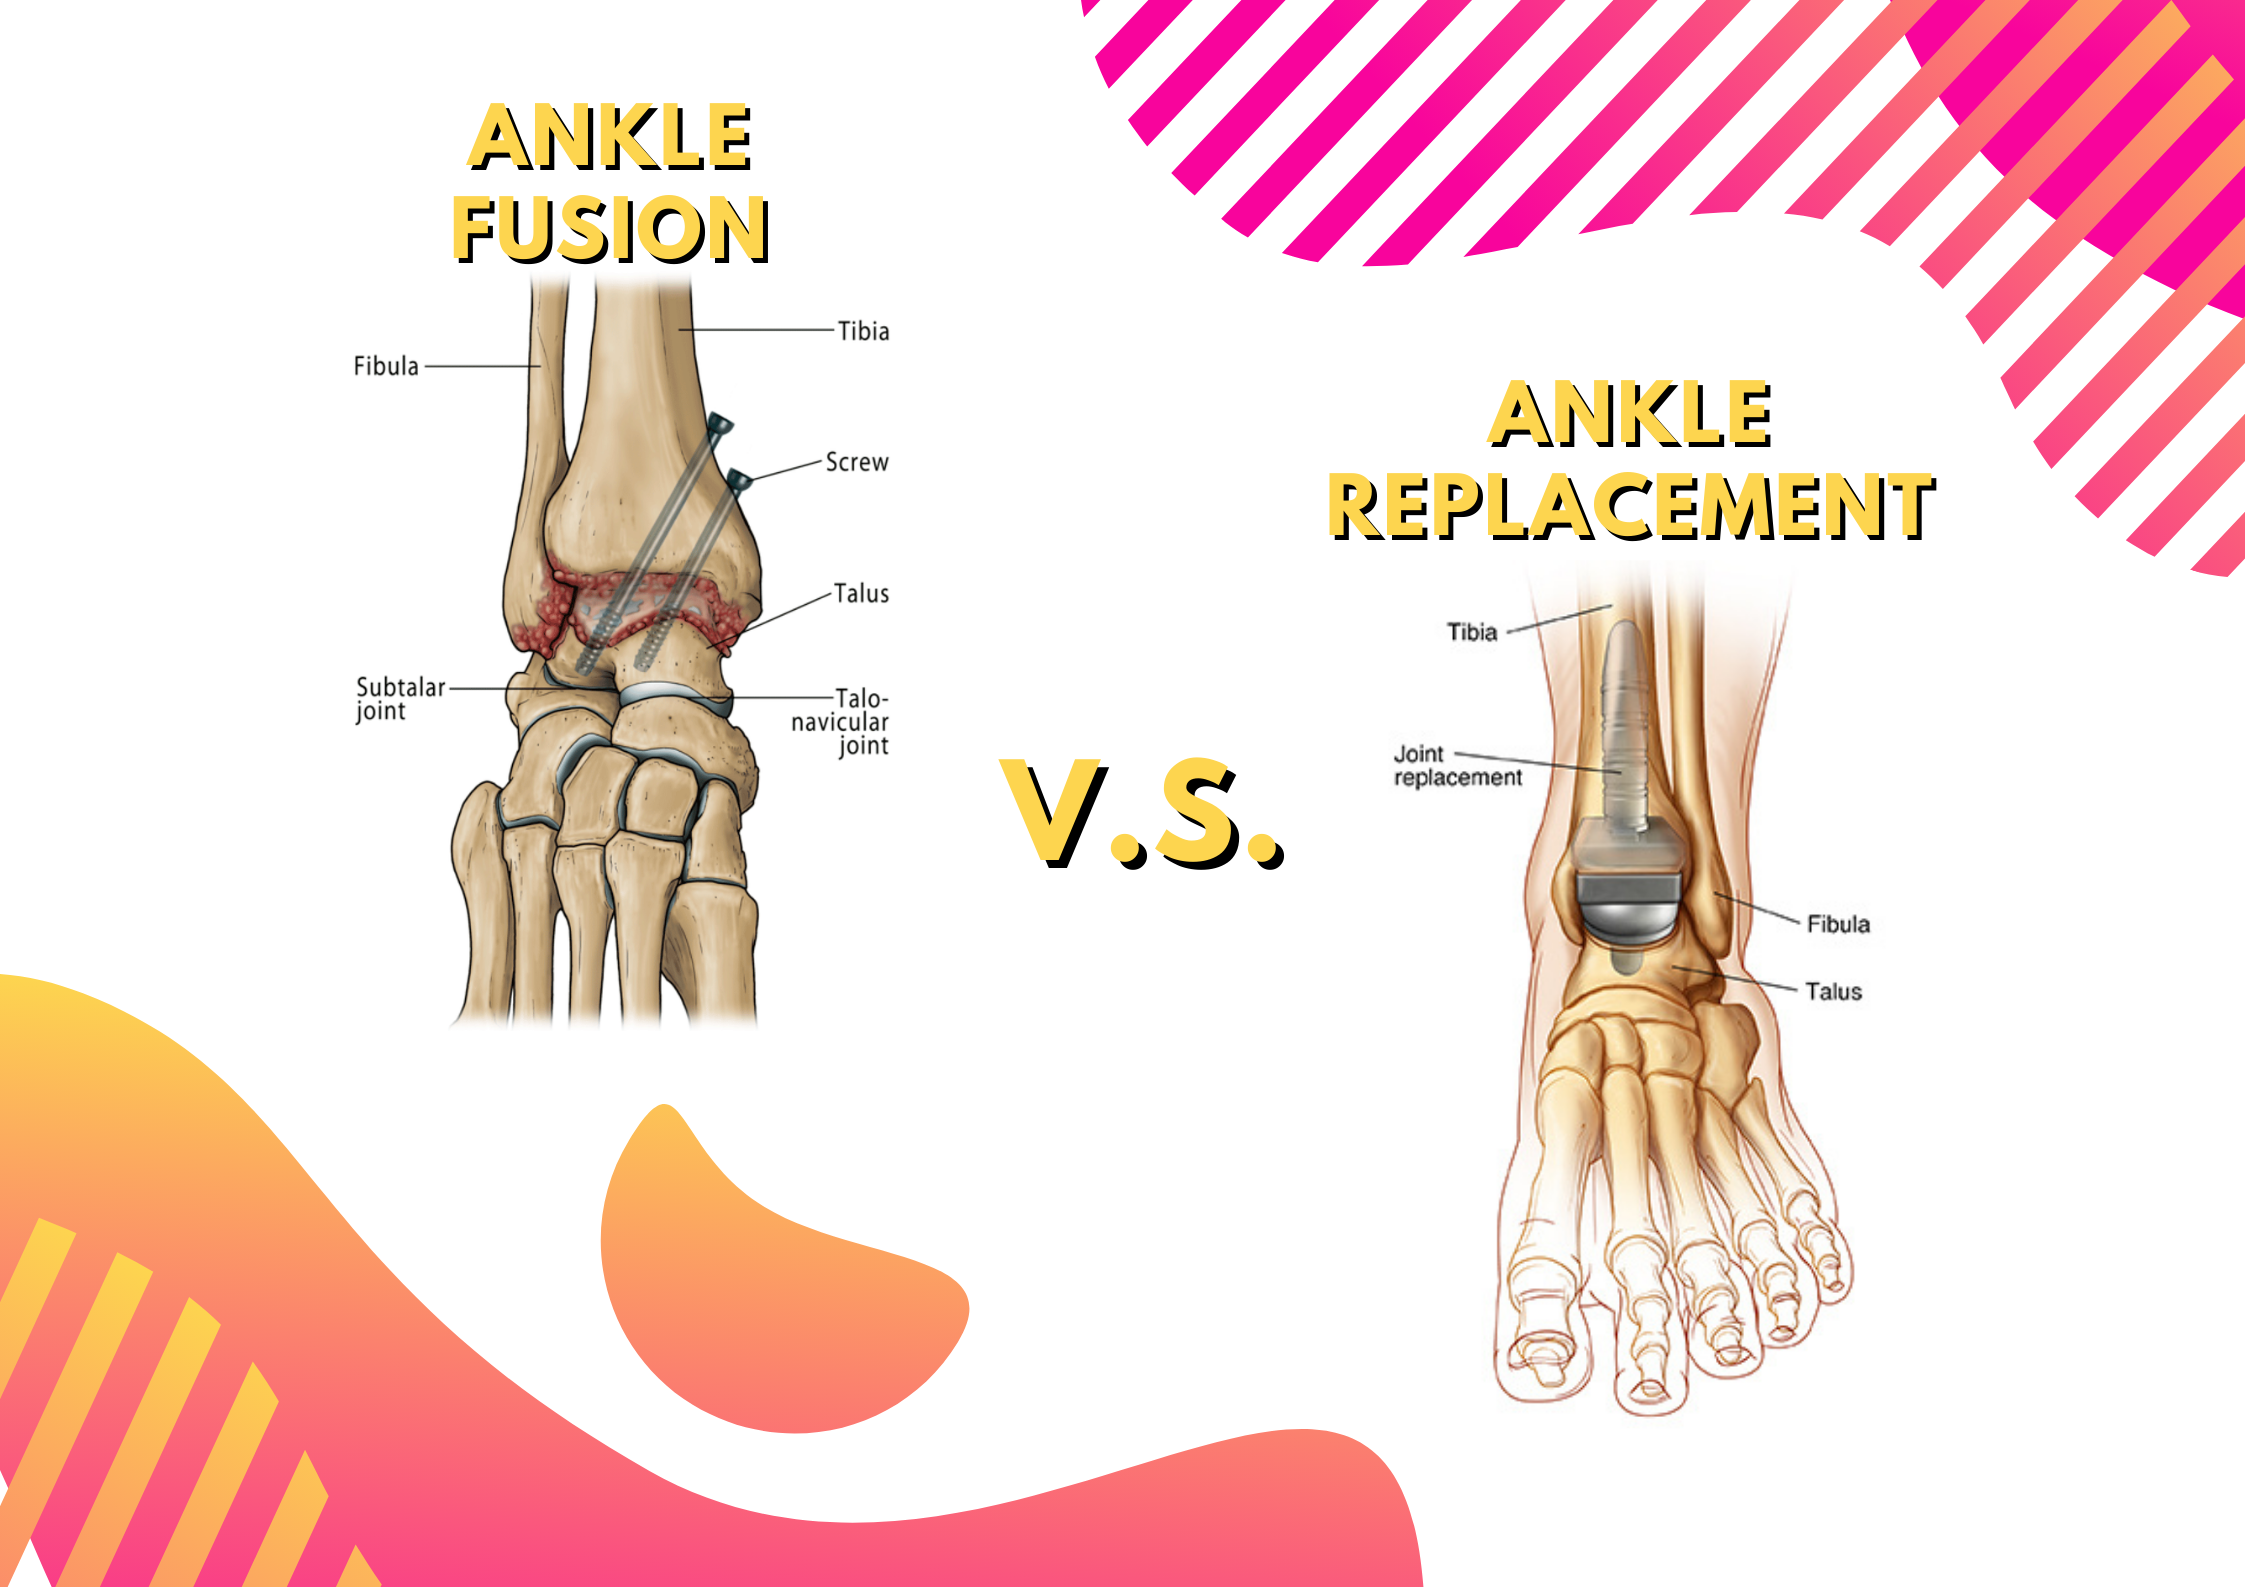 Ankle Fusion vs. Ankle Replacement